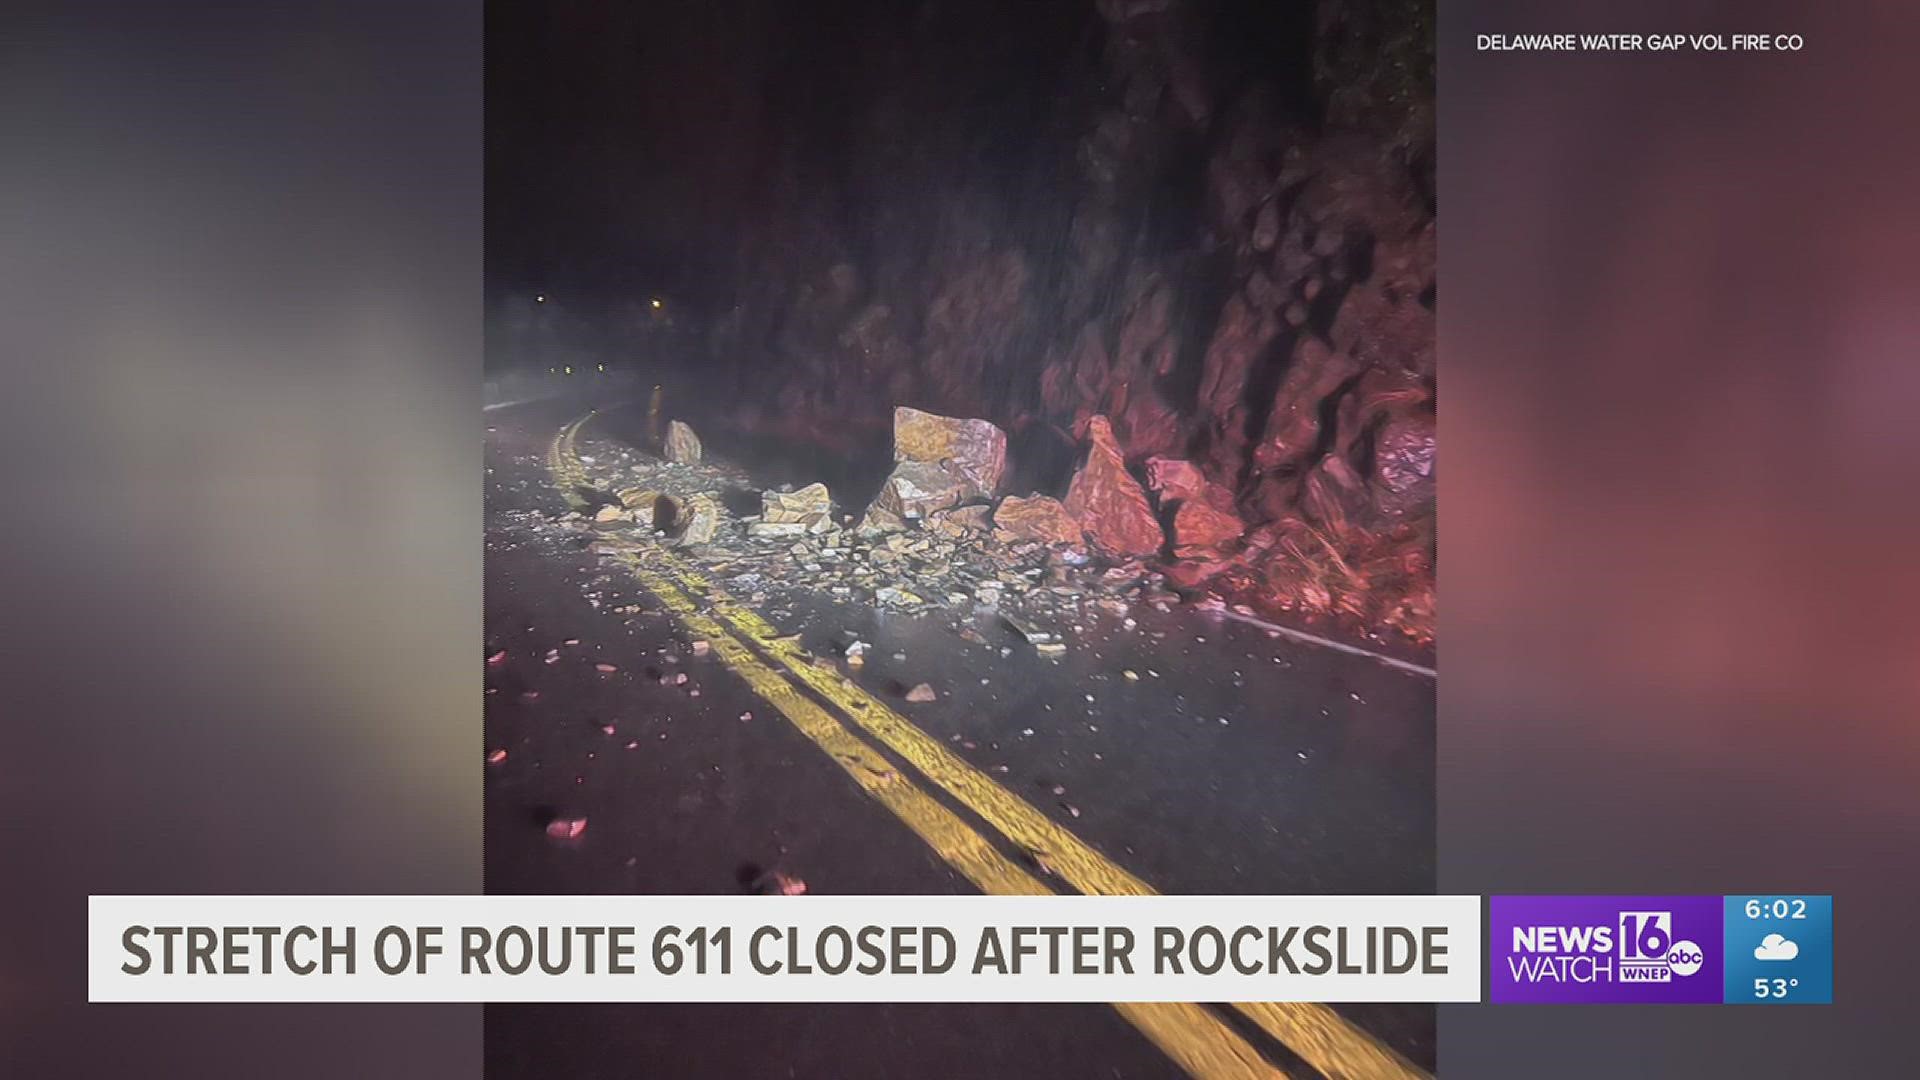 This isn't the first time water problems have caused PennDOT to close the road.